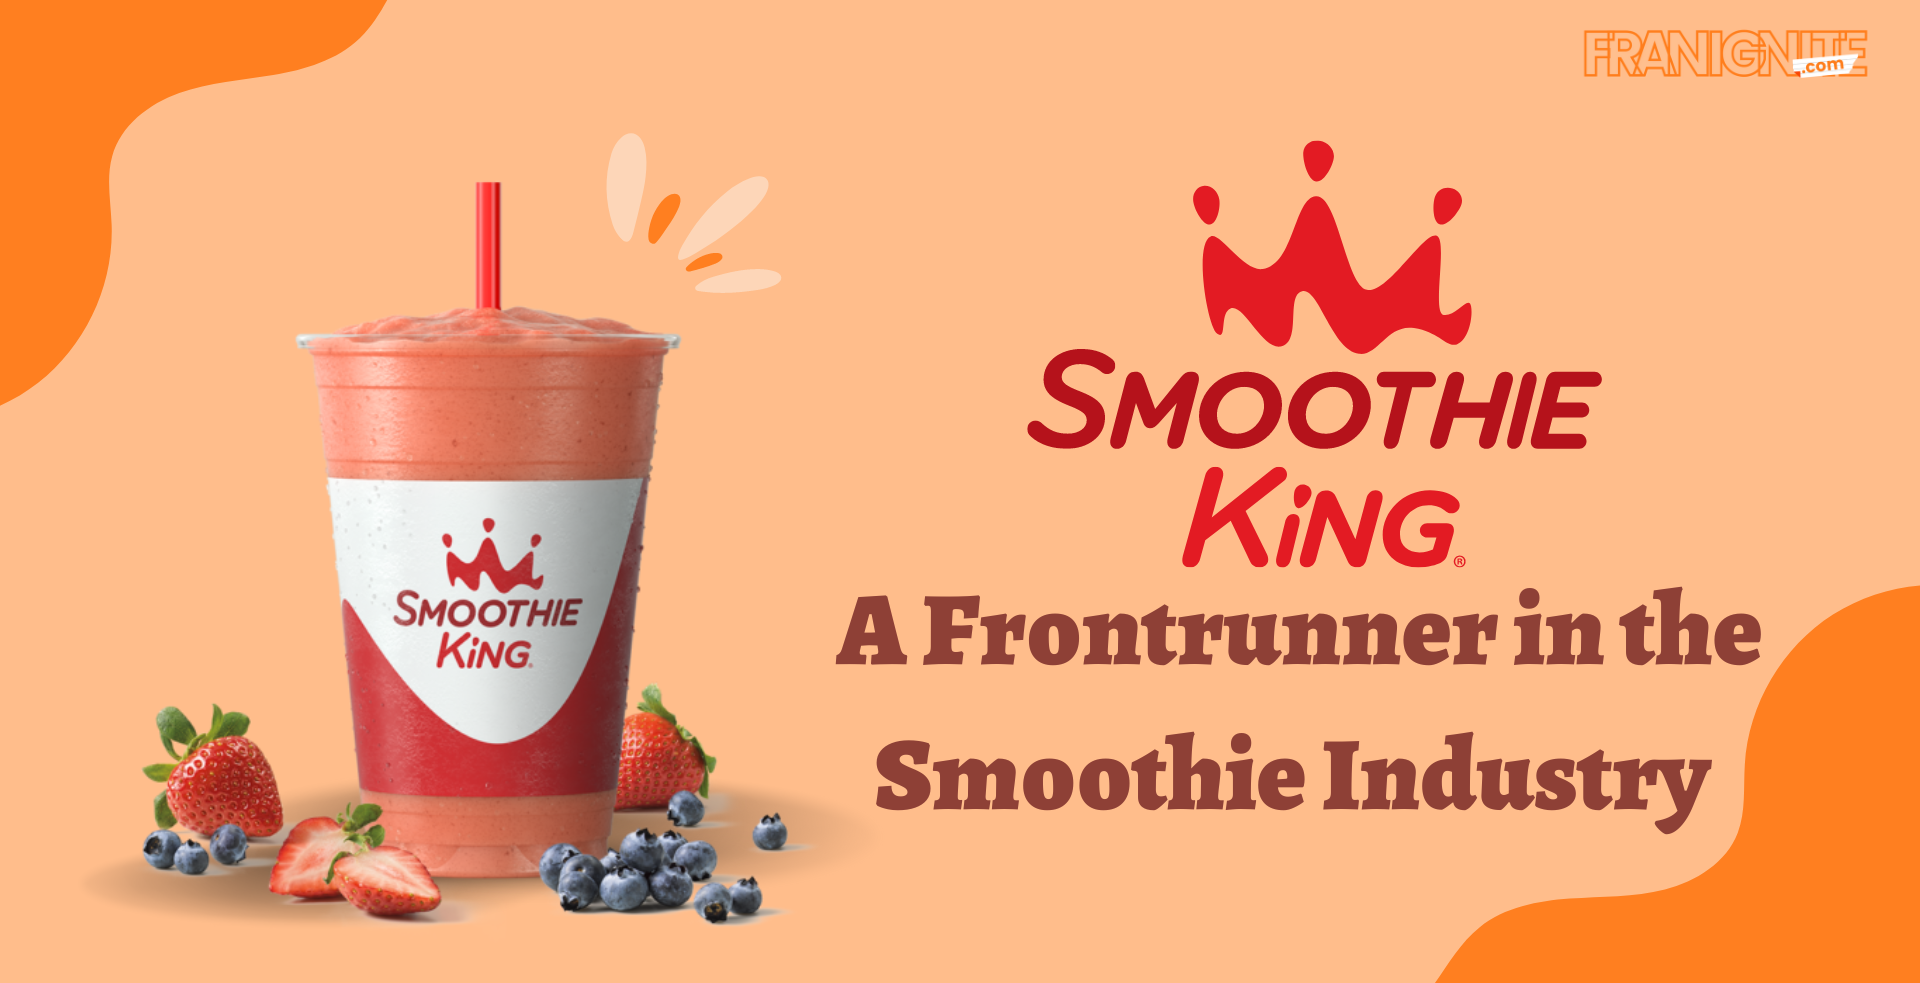 Smoothie King: A Frontrunner in the Smoothie Industry